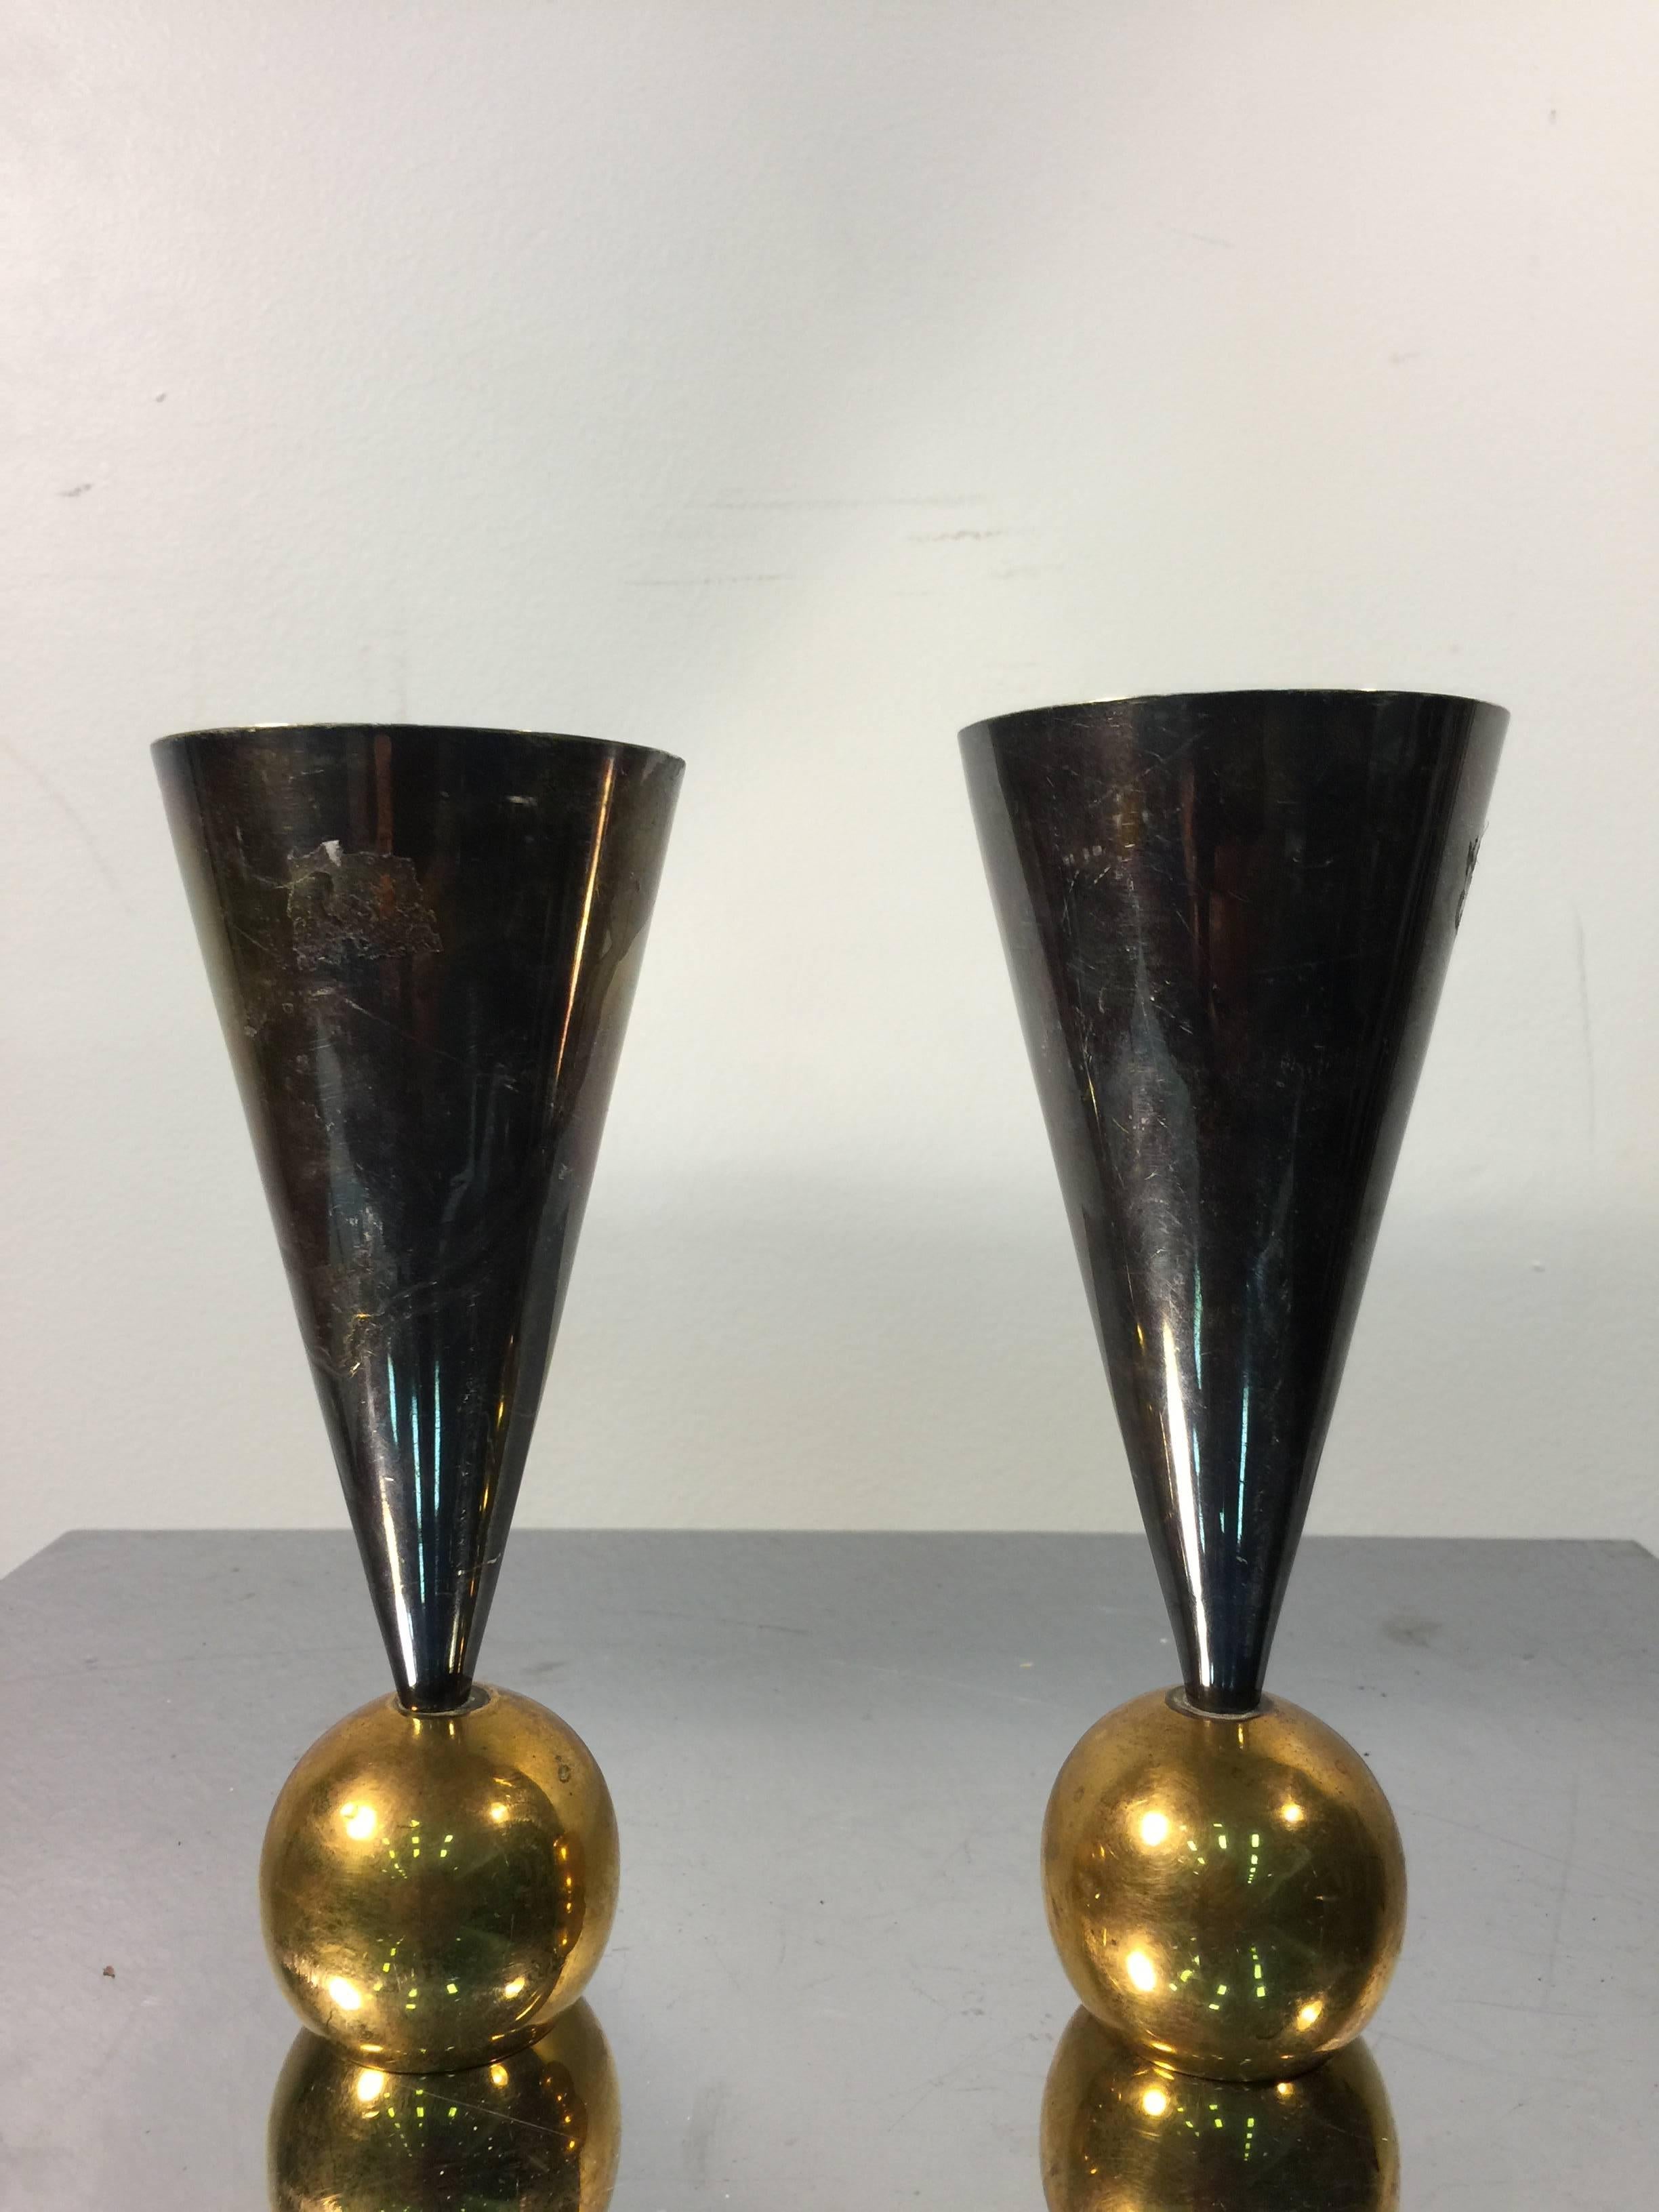 Italian Spectacular Solid Brass Pair of Gio Ponti Style Candlesticks, circa 1970 For Sale